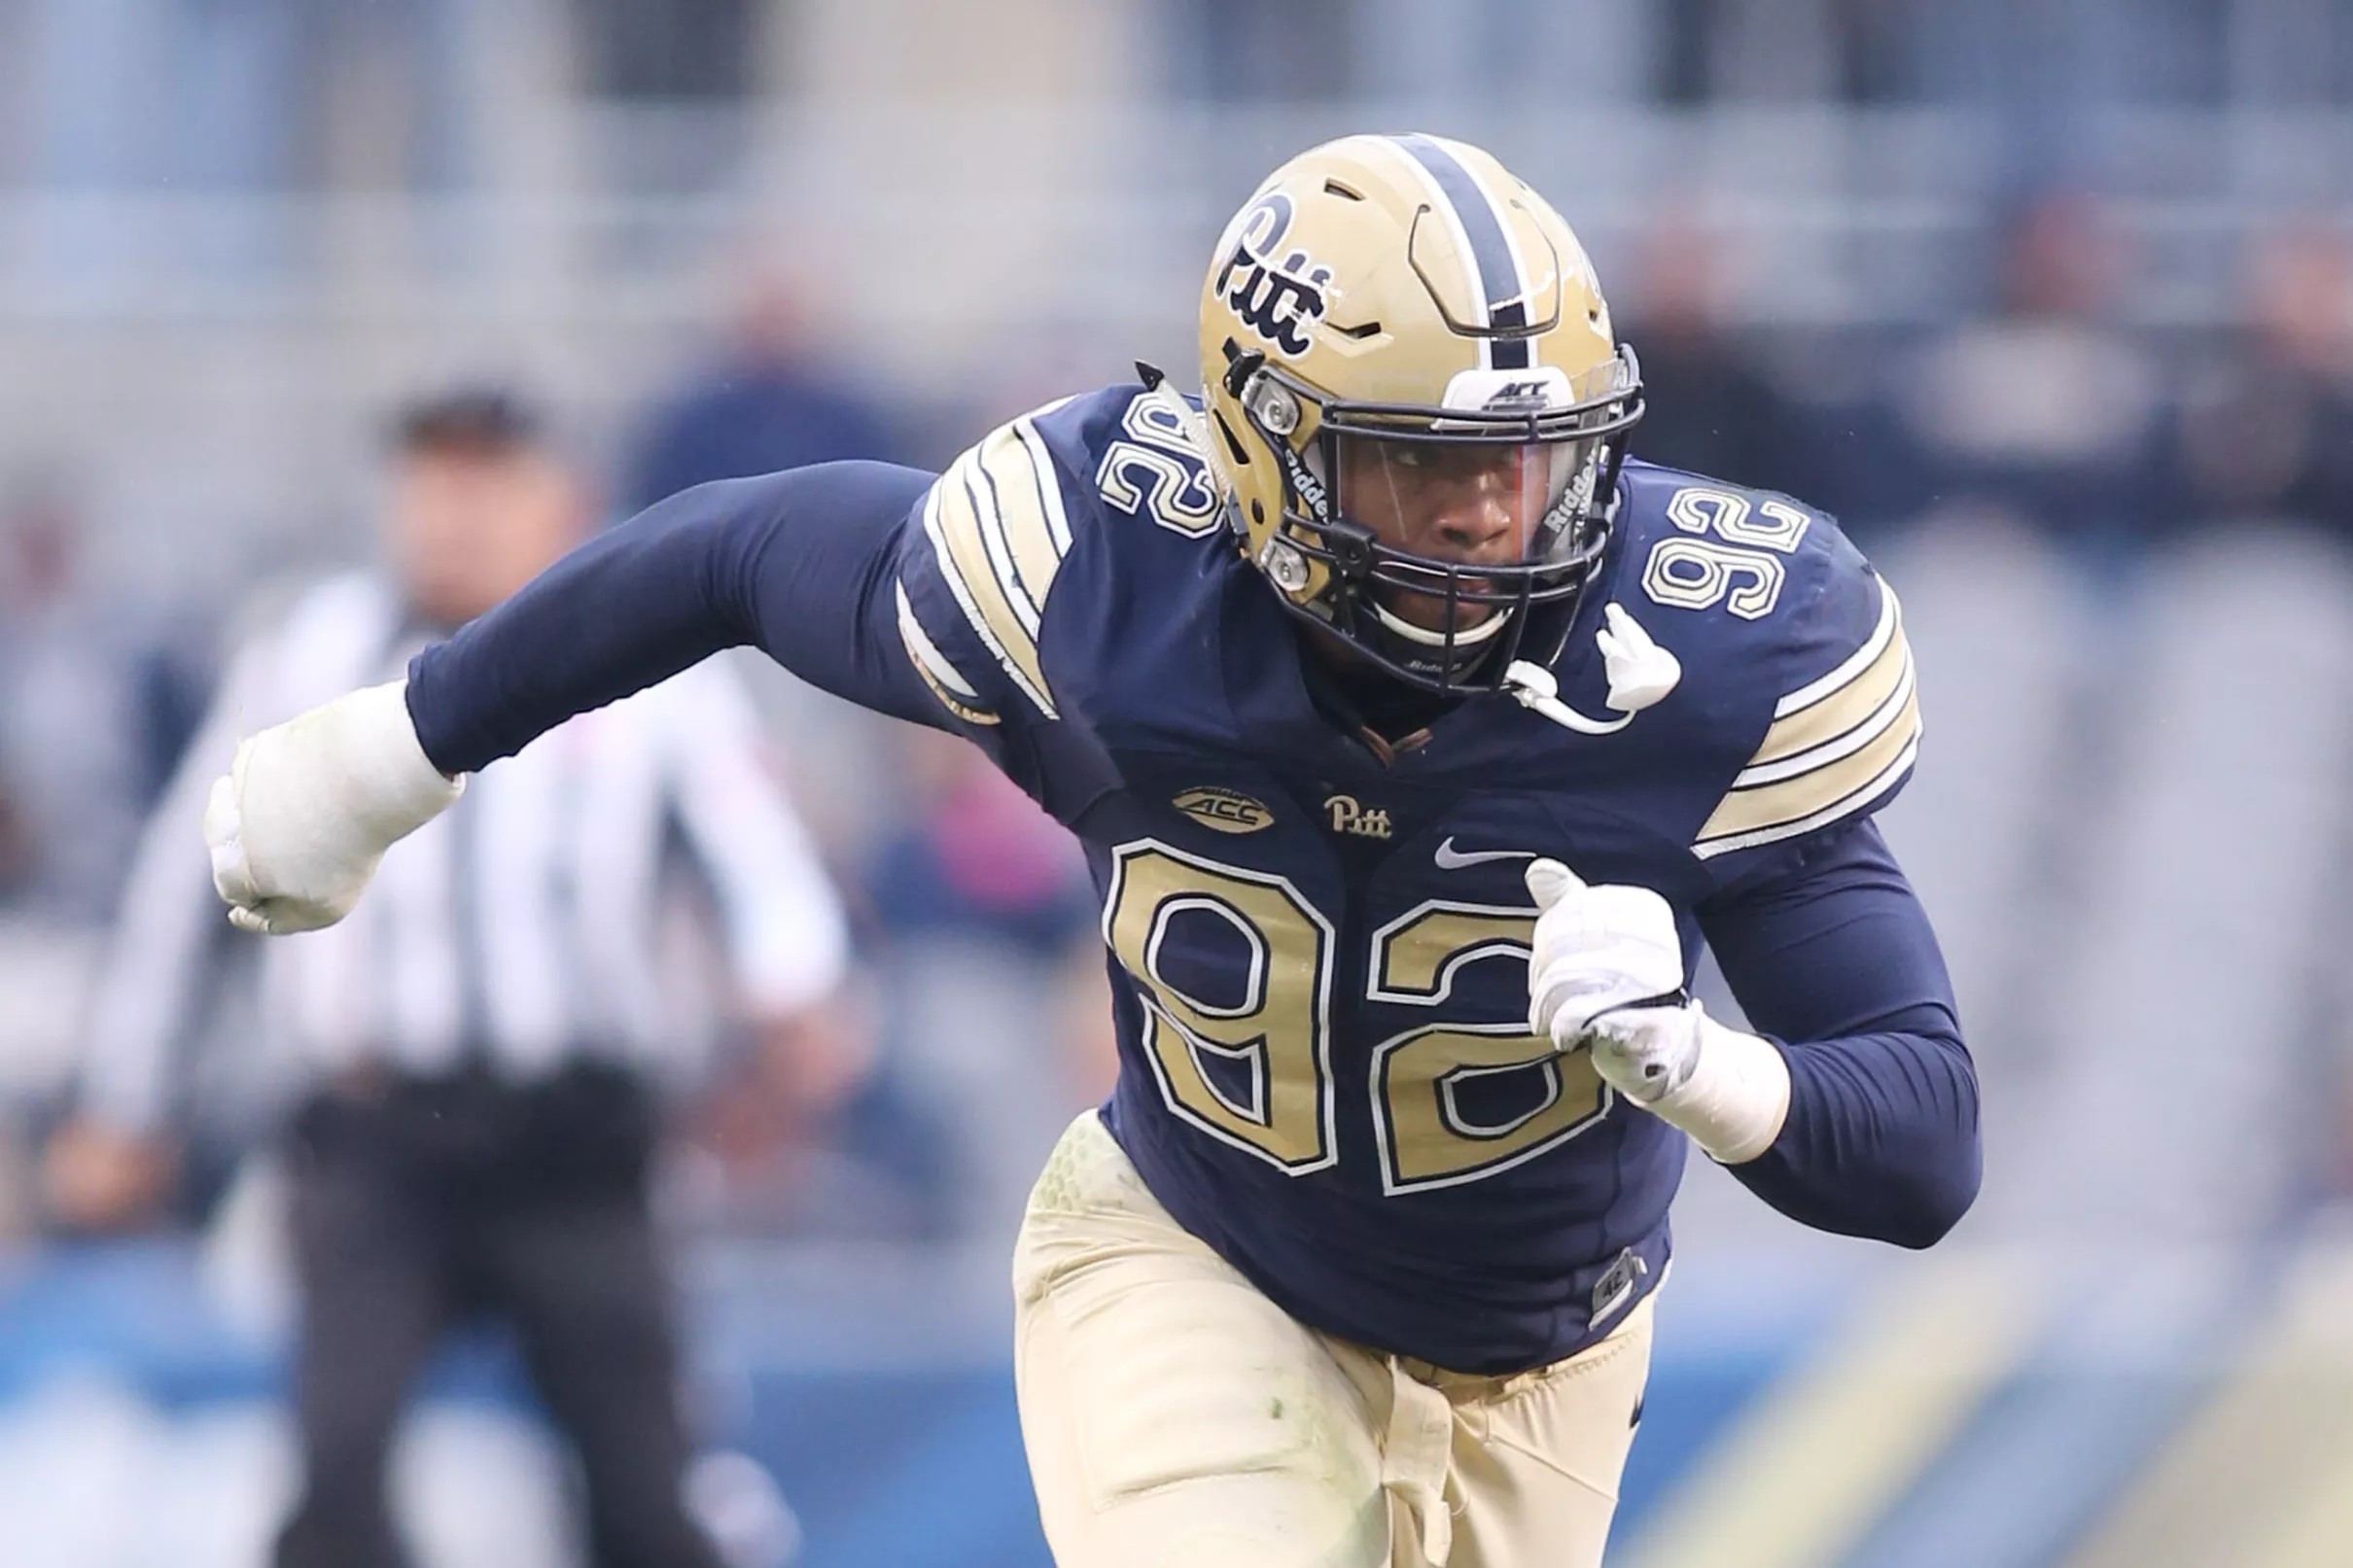 several-transfer-destinations-announced-for-former-pitt-players